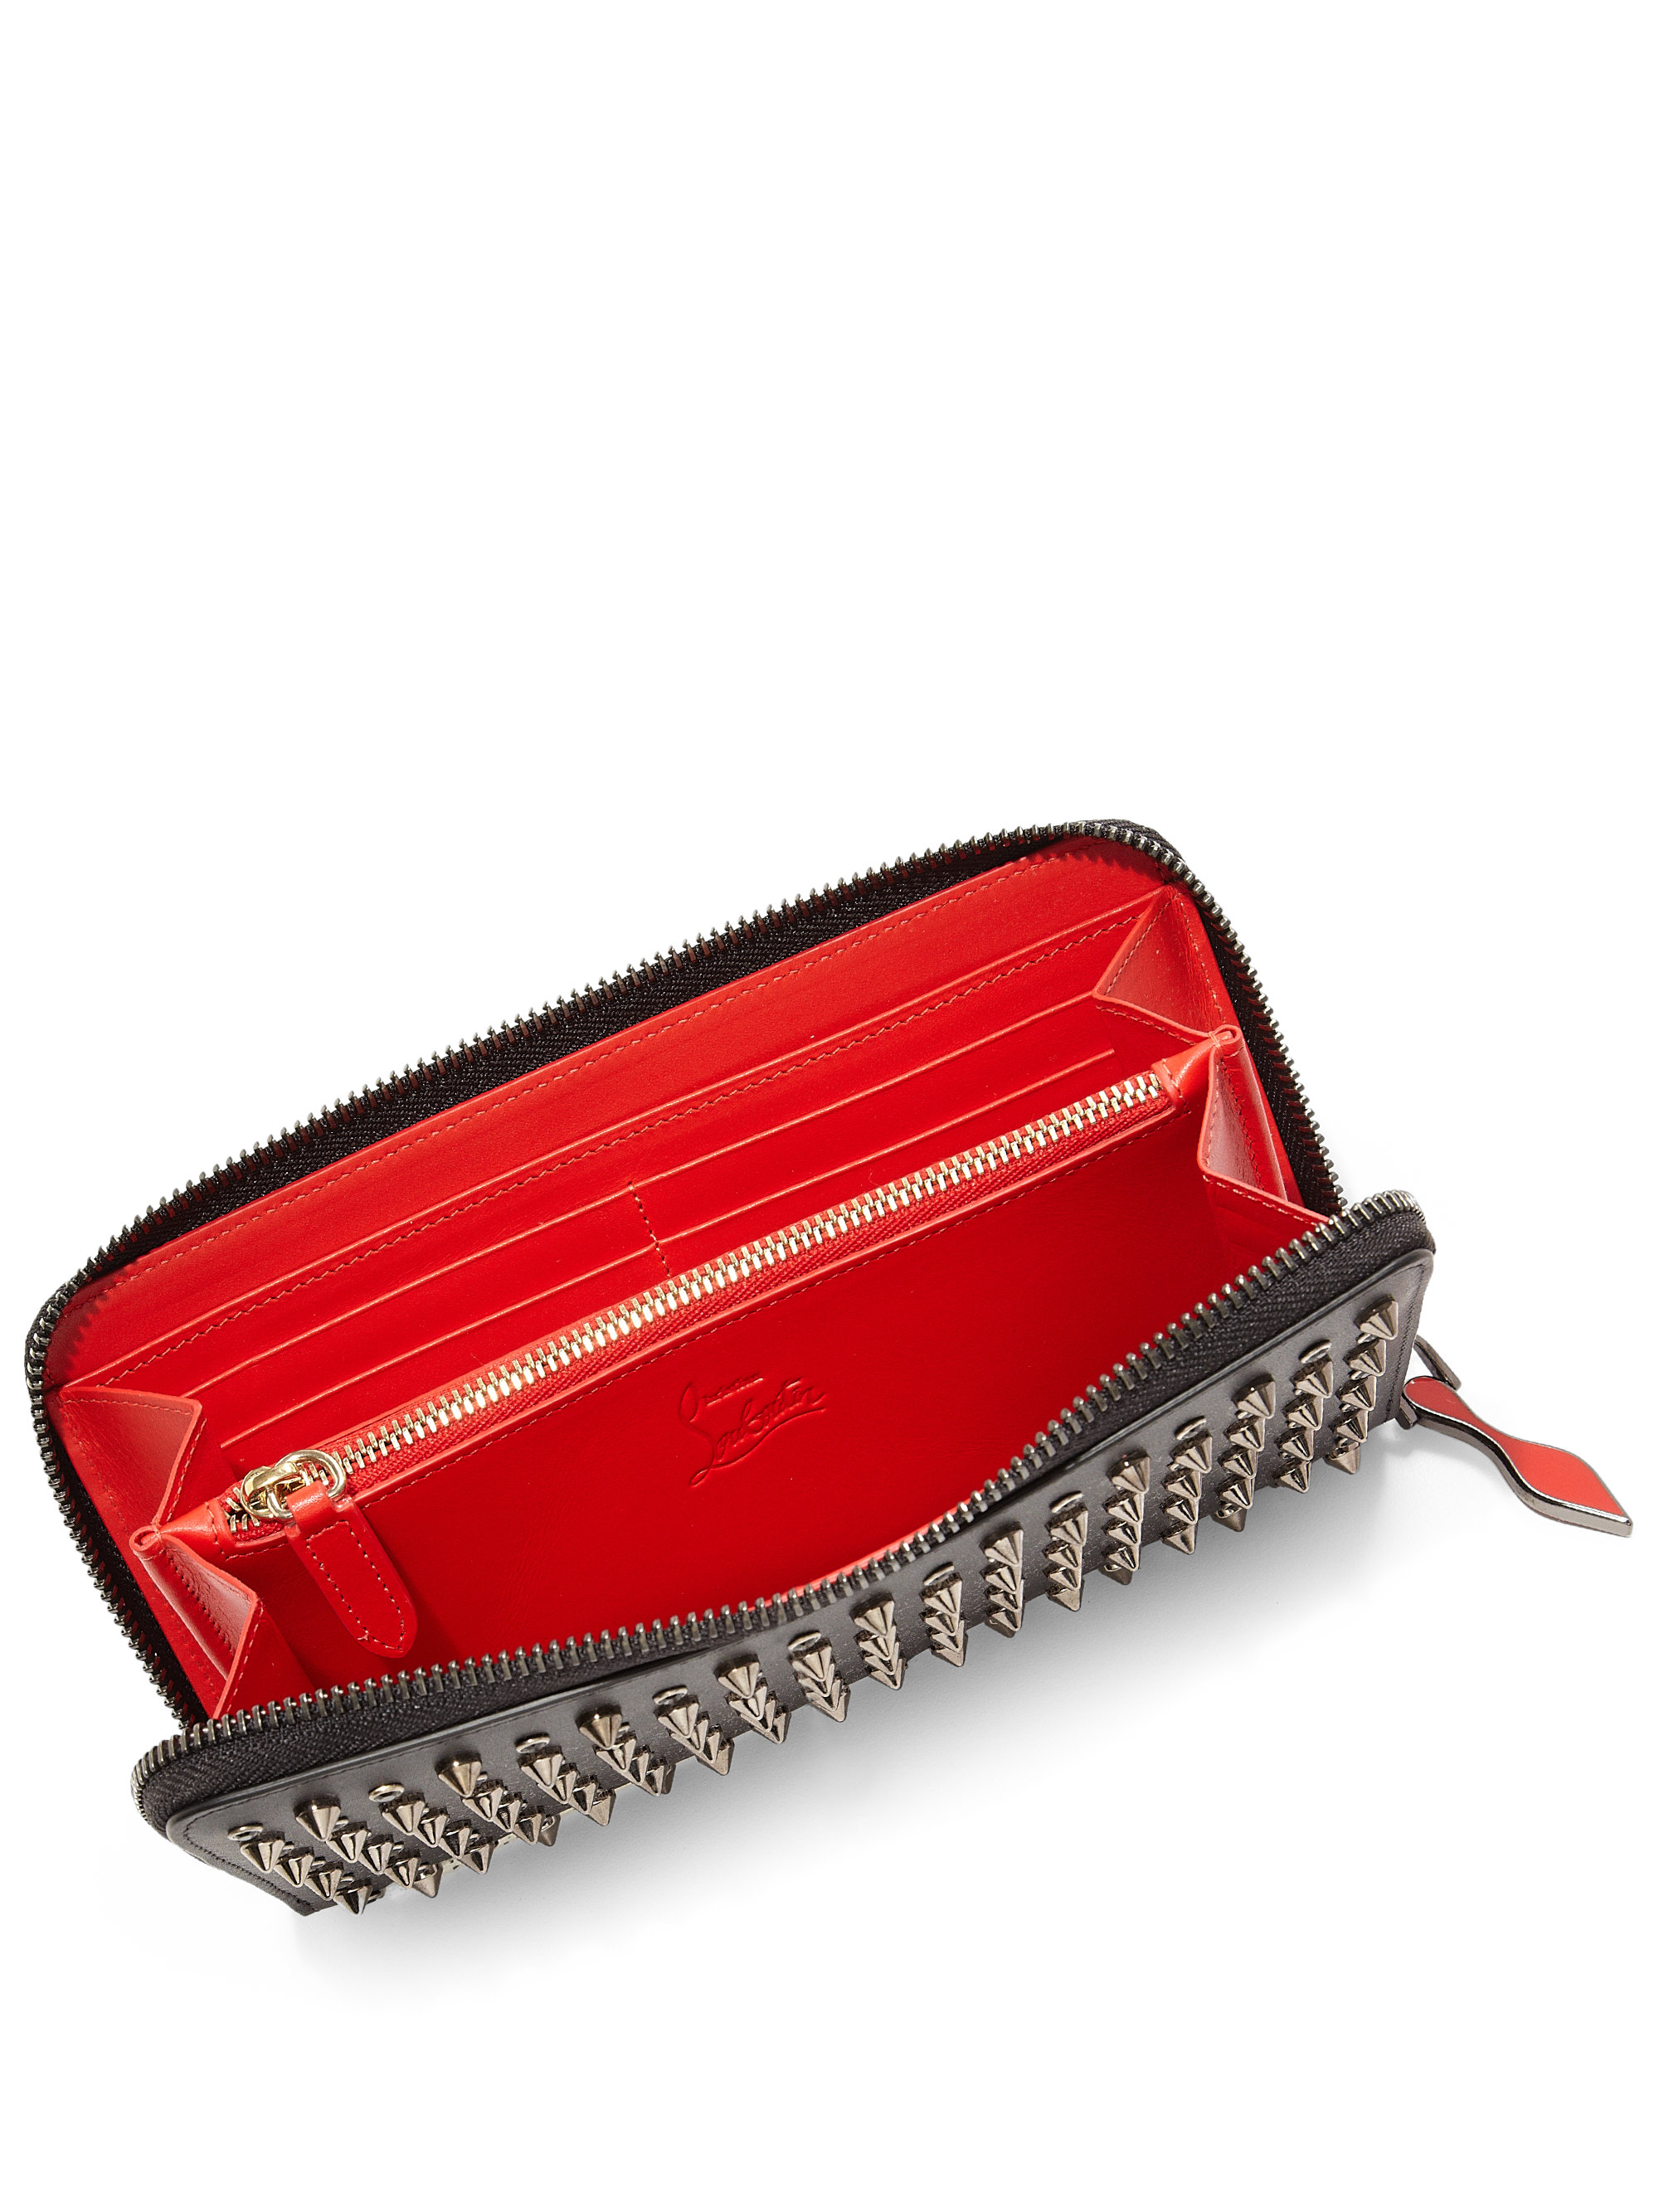 Christian Louboutin Panettone Studded Wallet in Black - Lyst